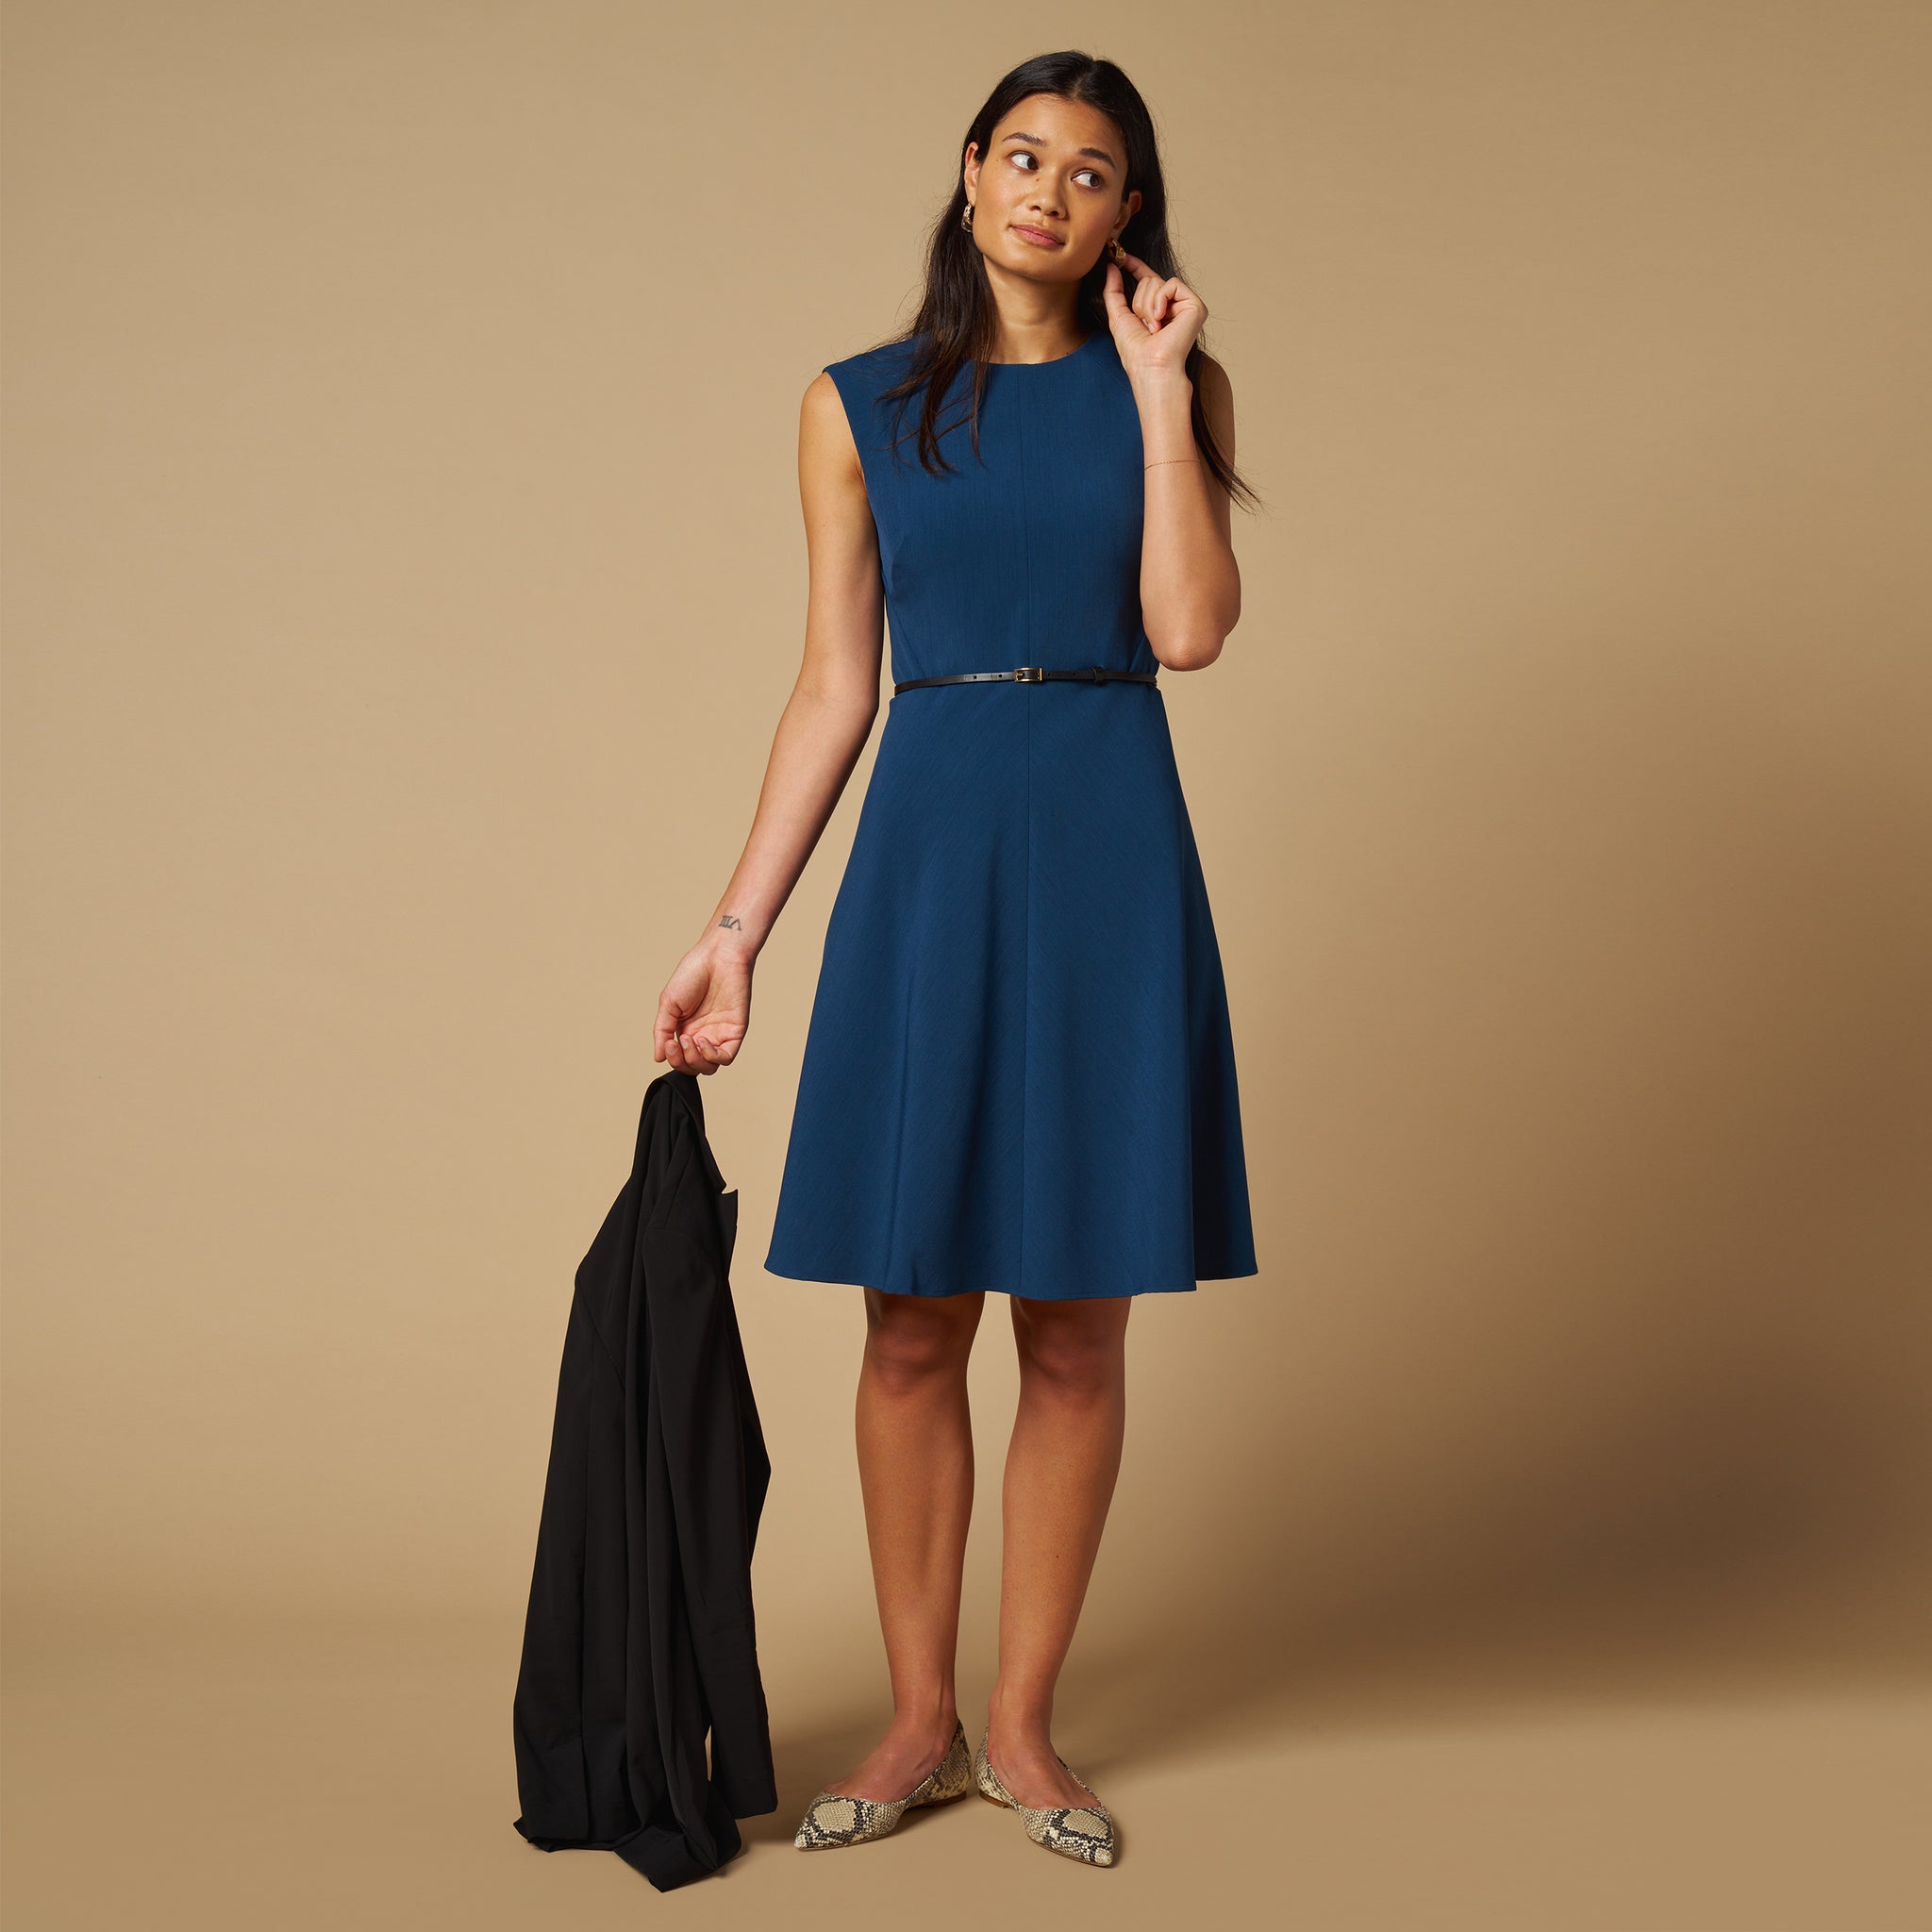 mood image of a woman wearing the toi dress in deep teal